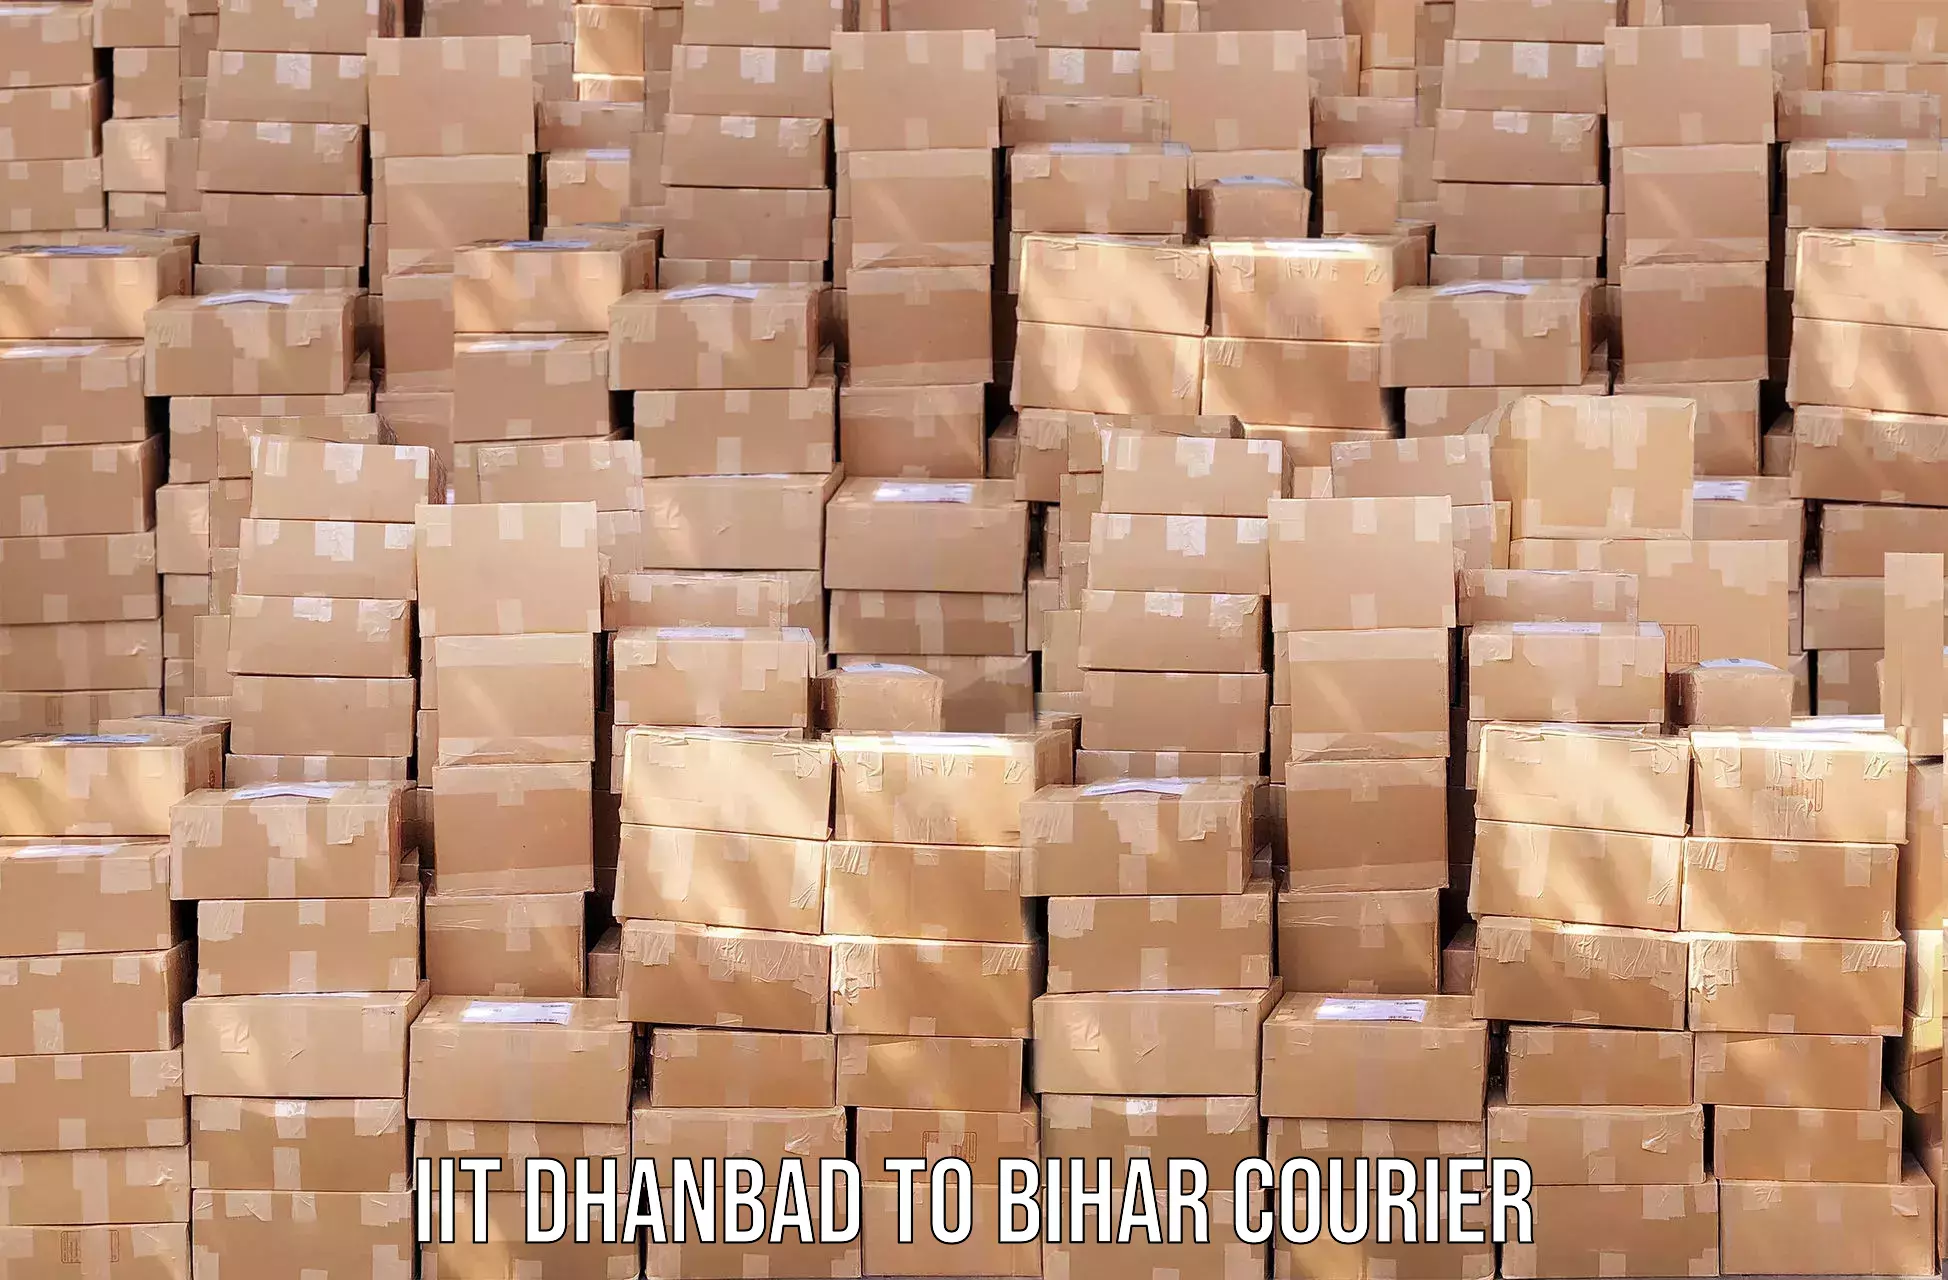 Global courier networks IIT Dhanbad to Maheshkhunt